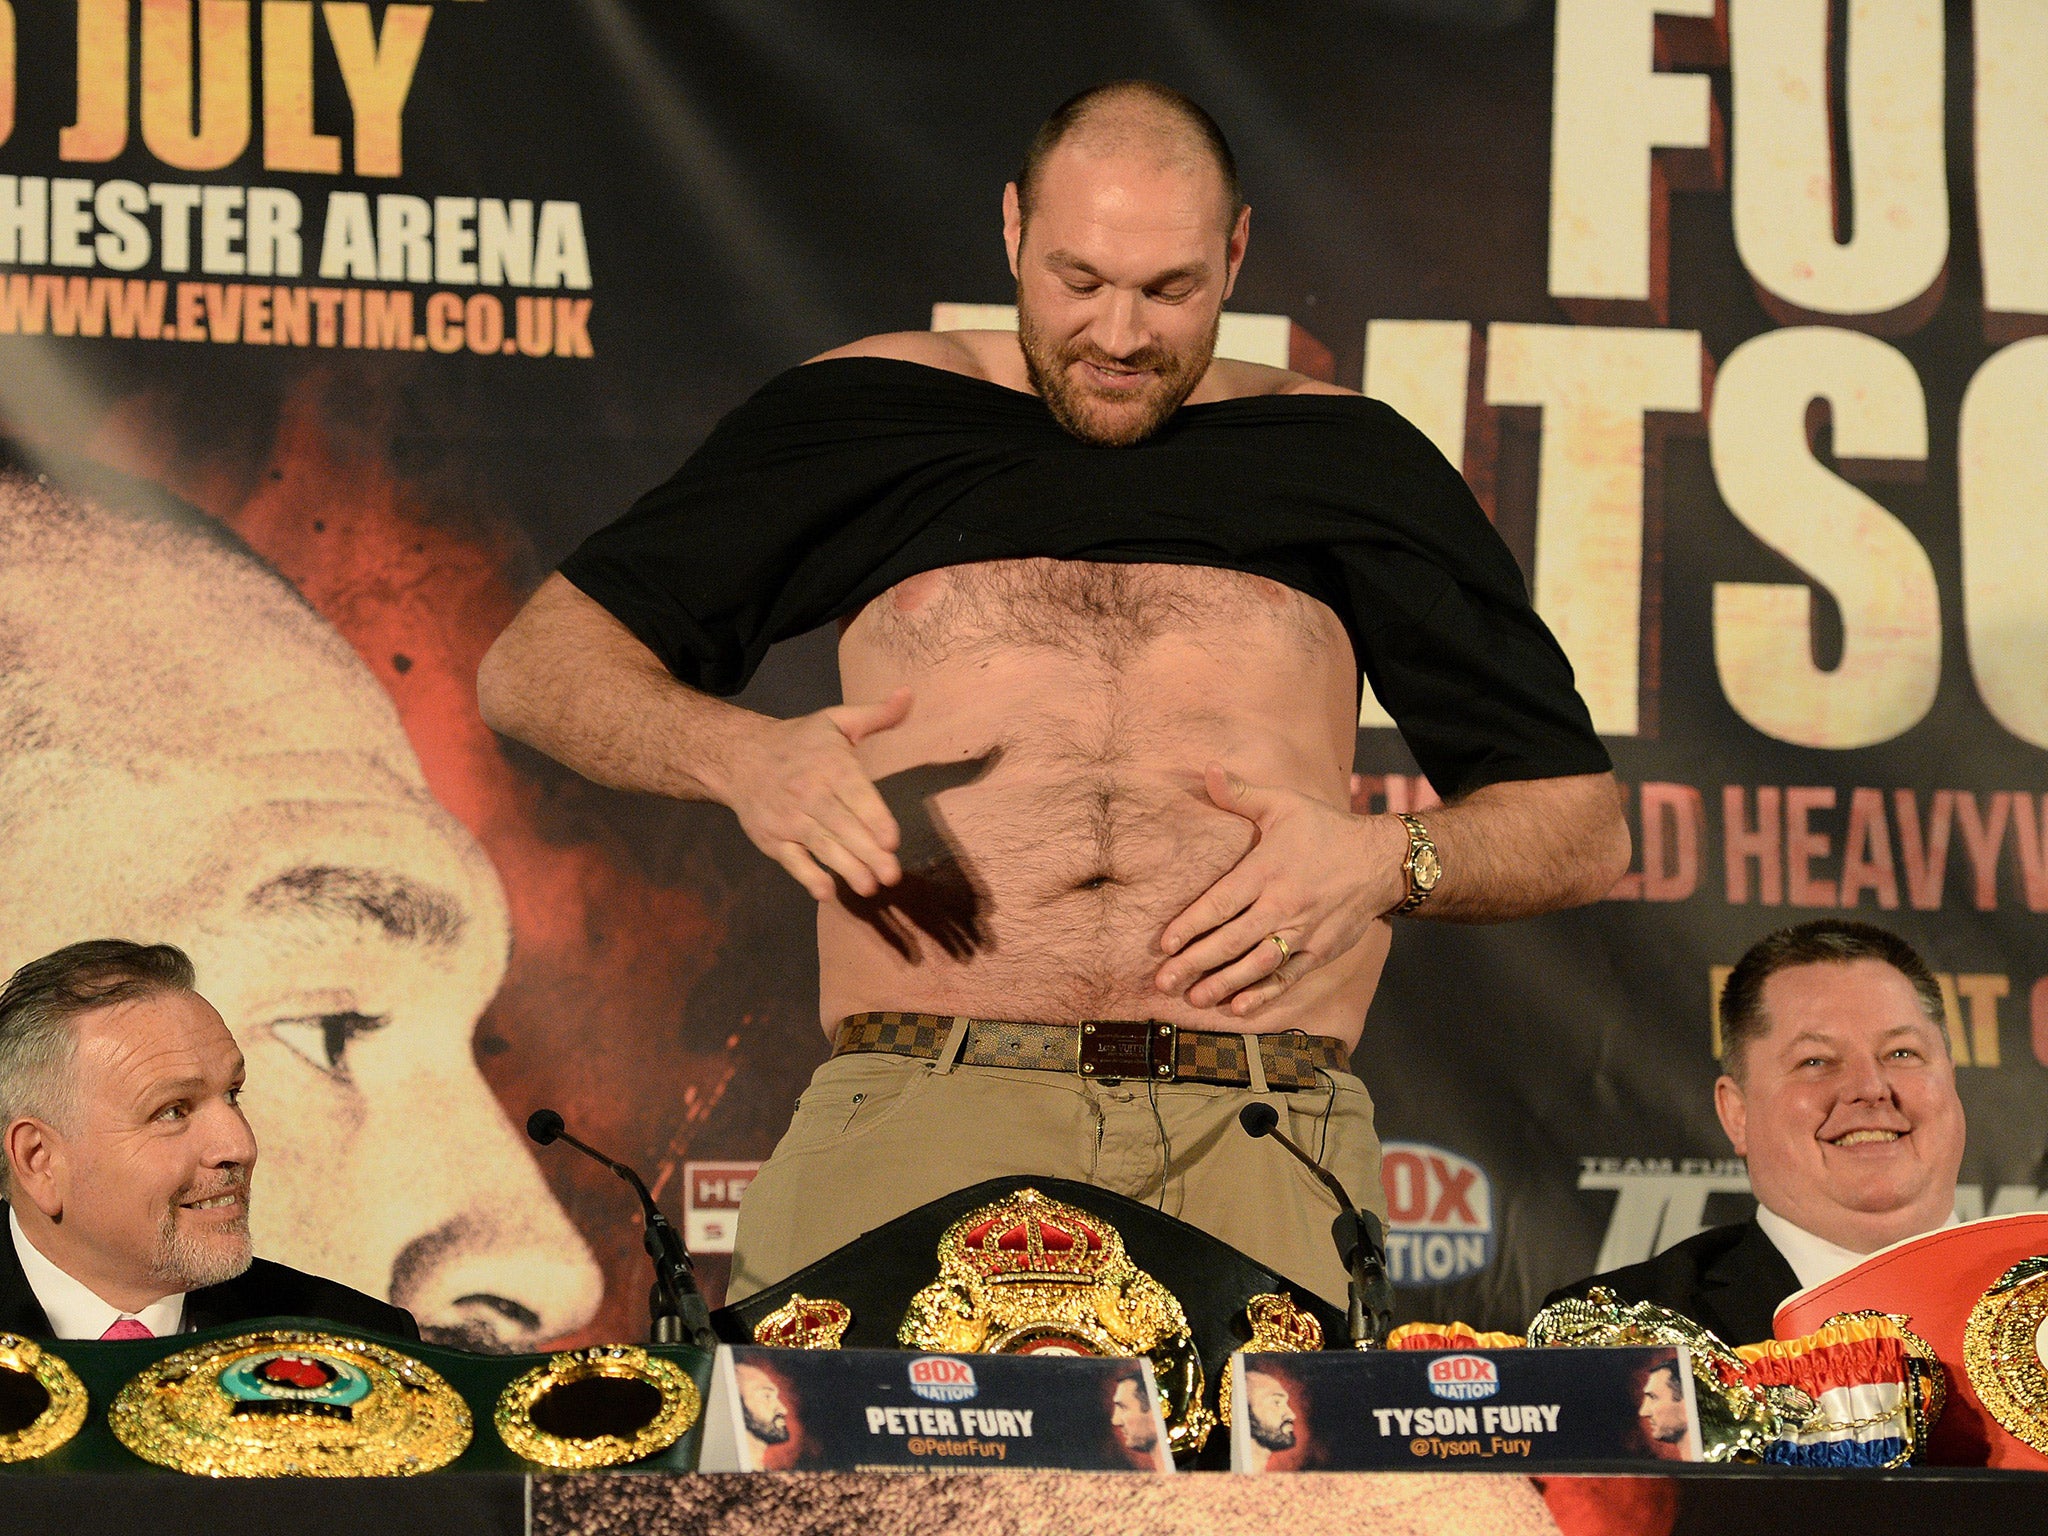 Tyson Fury takes off his t-shirt during a press conference